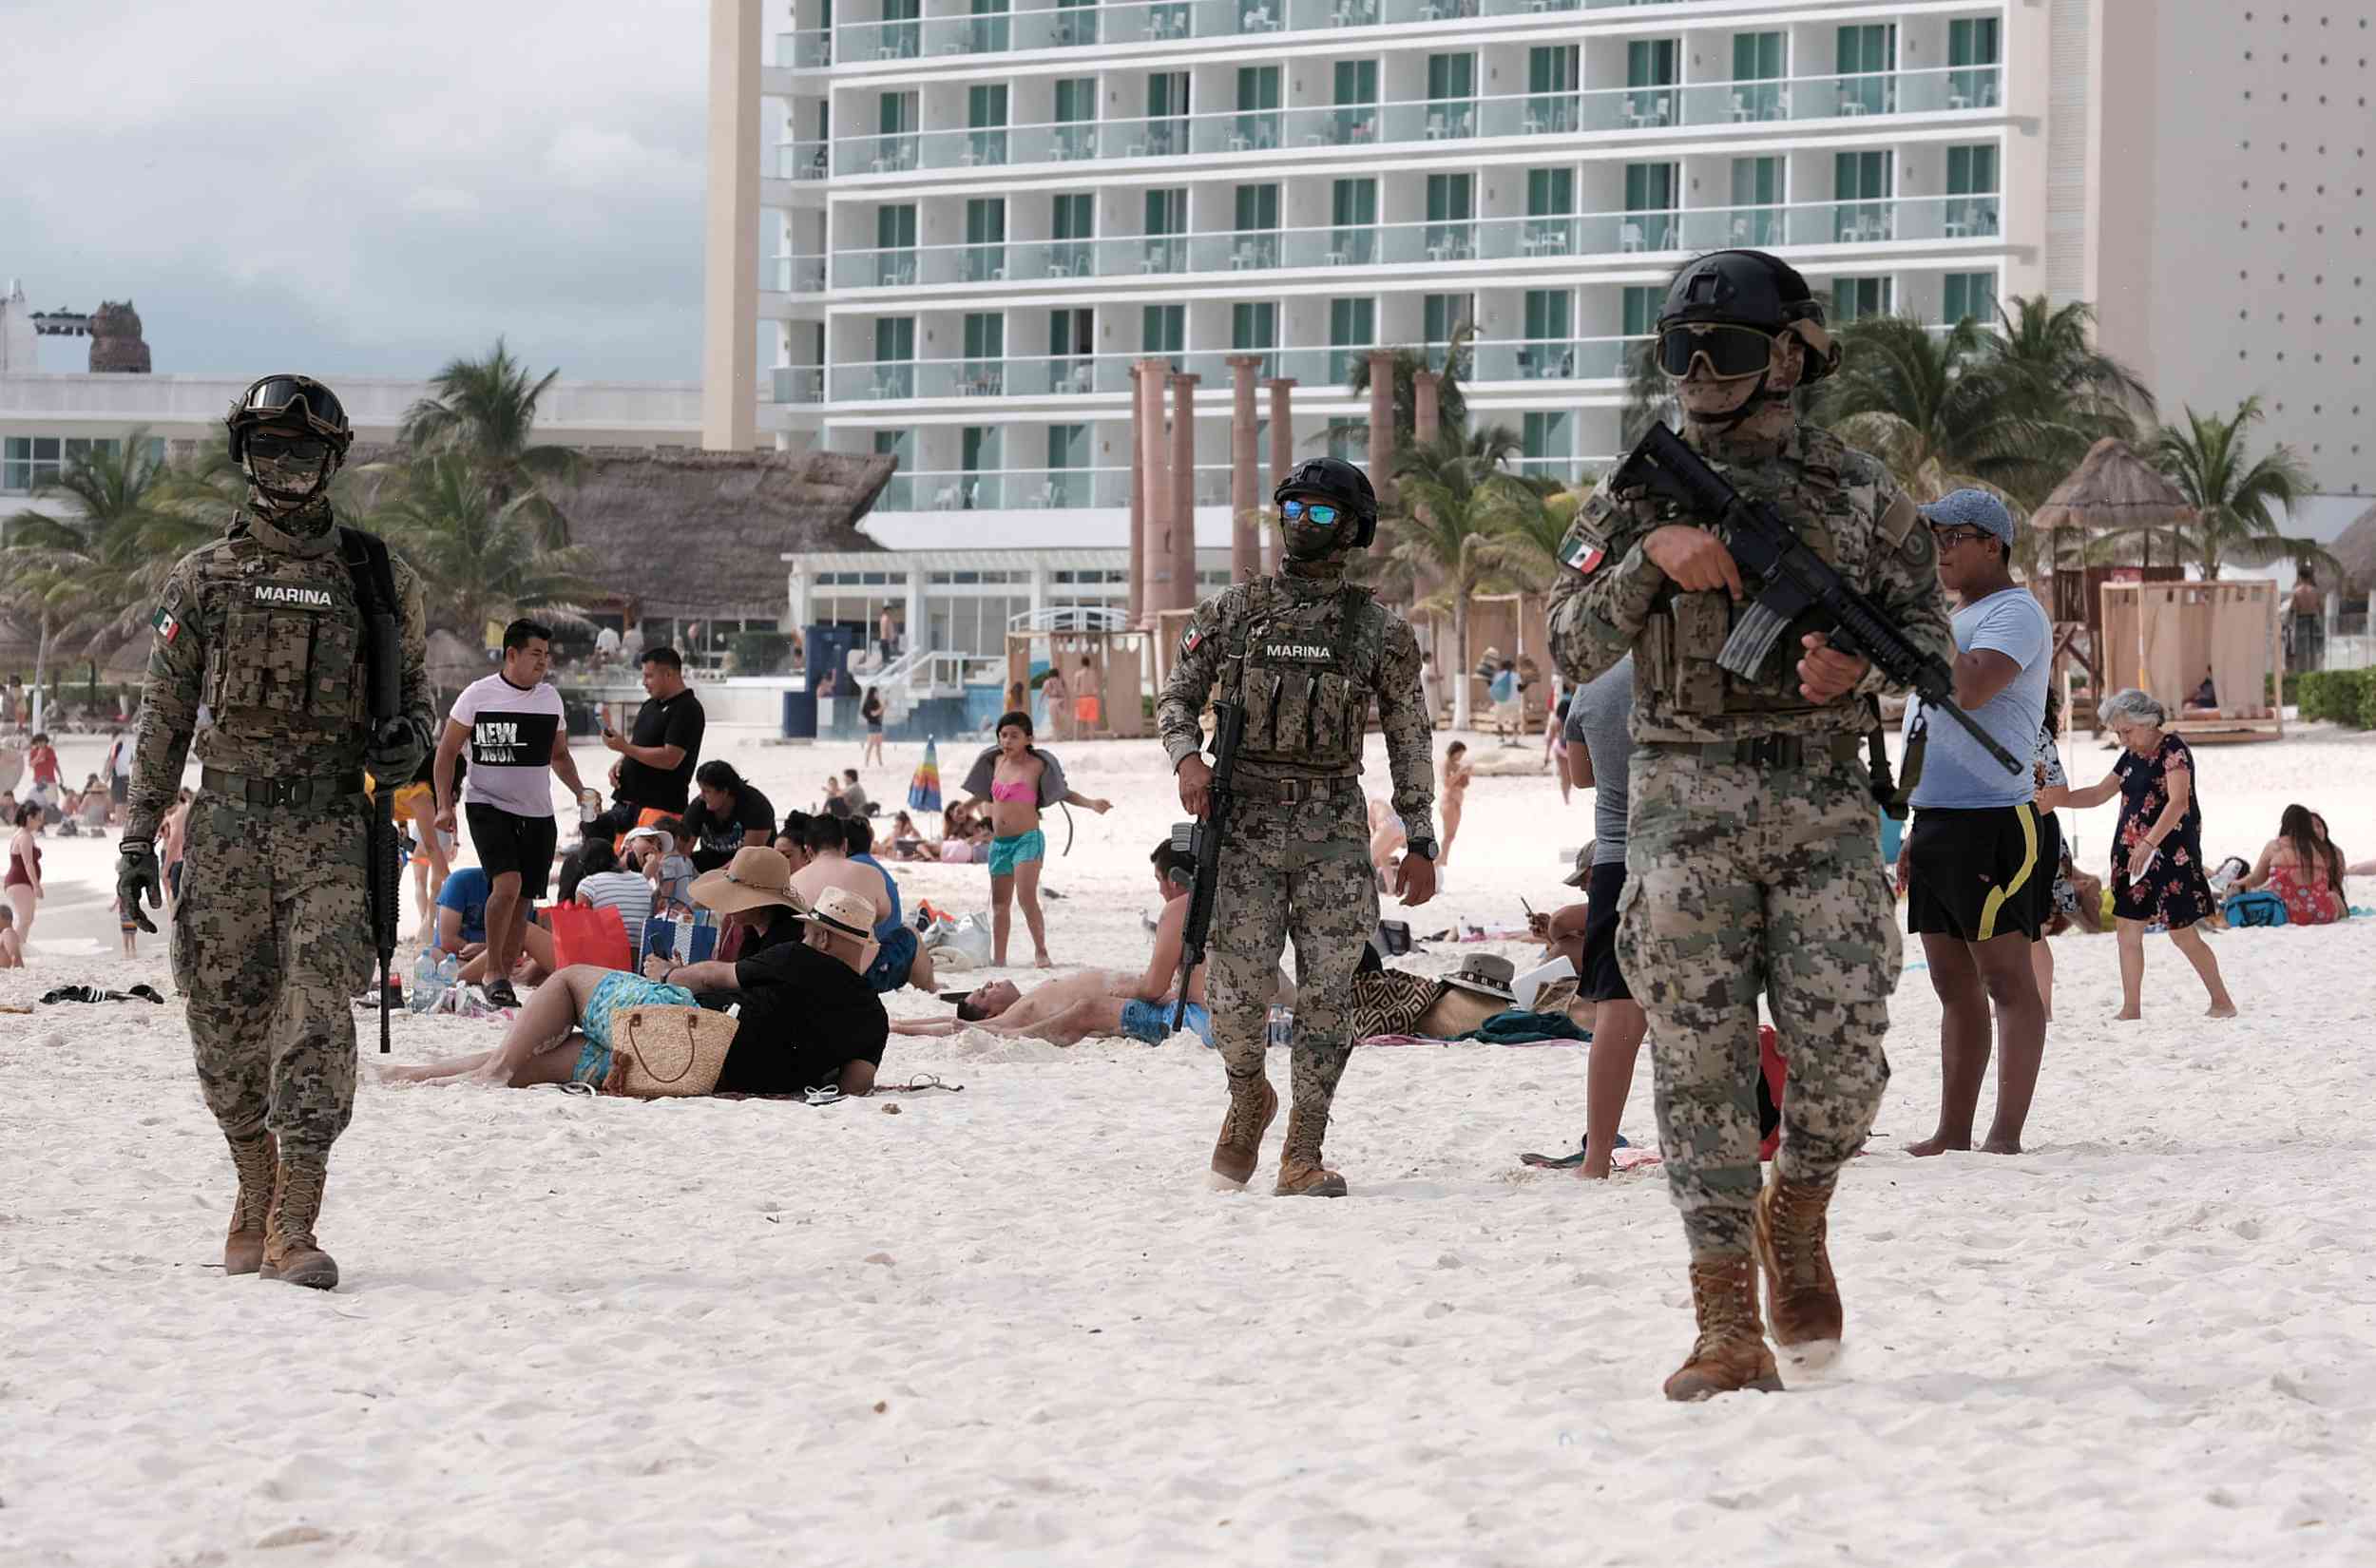 Fears of attack on tourists on Mexico beach after pilot under investigation